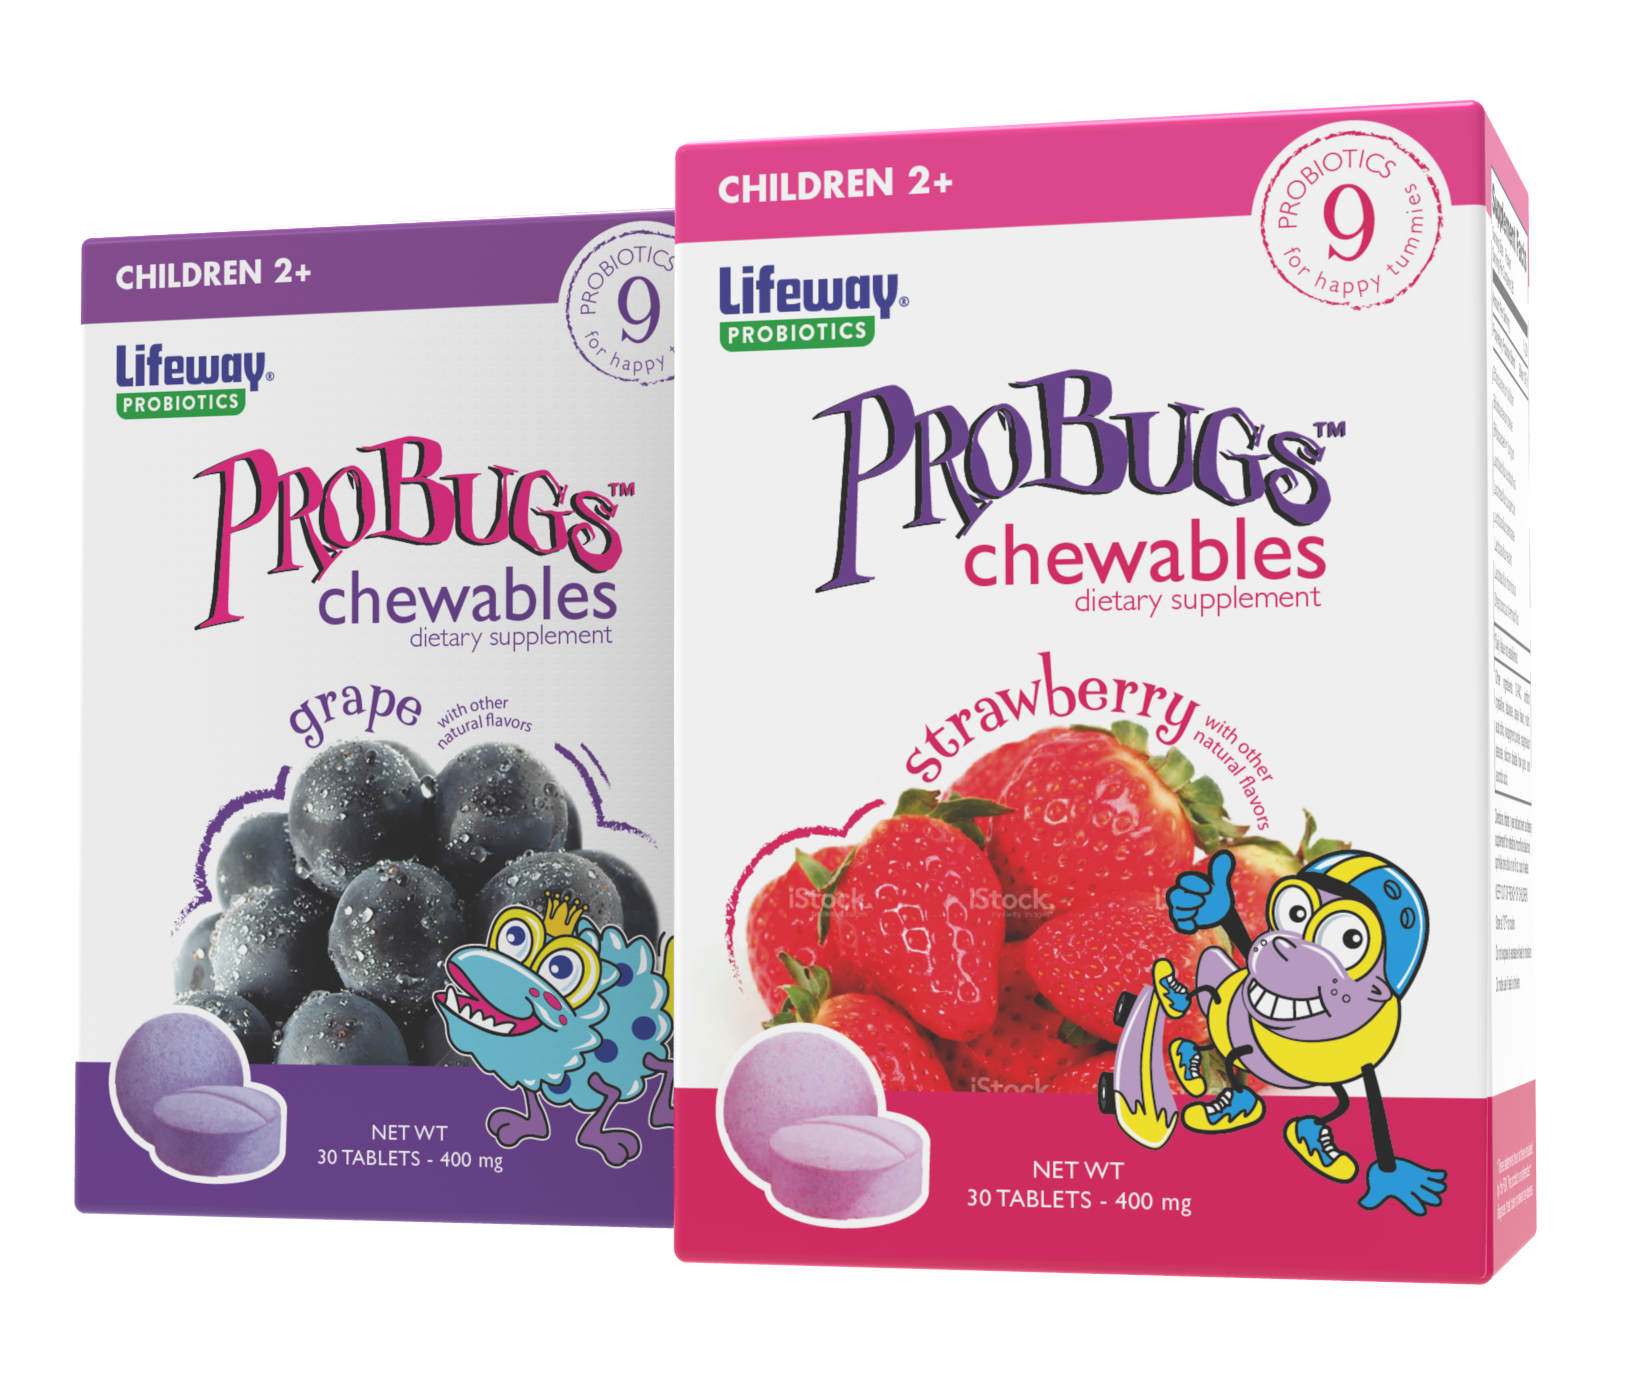 Probugs_chewables_group